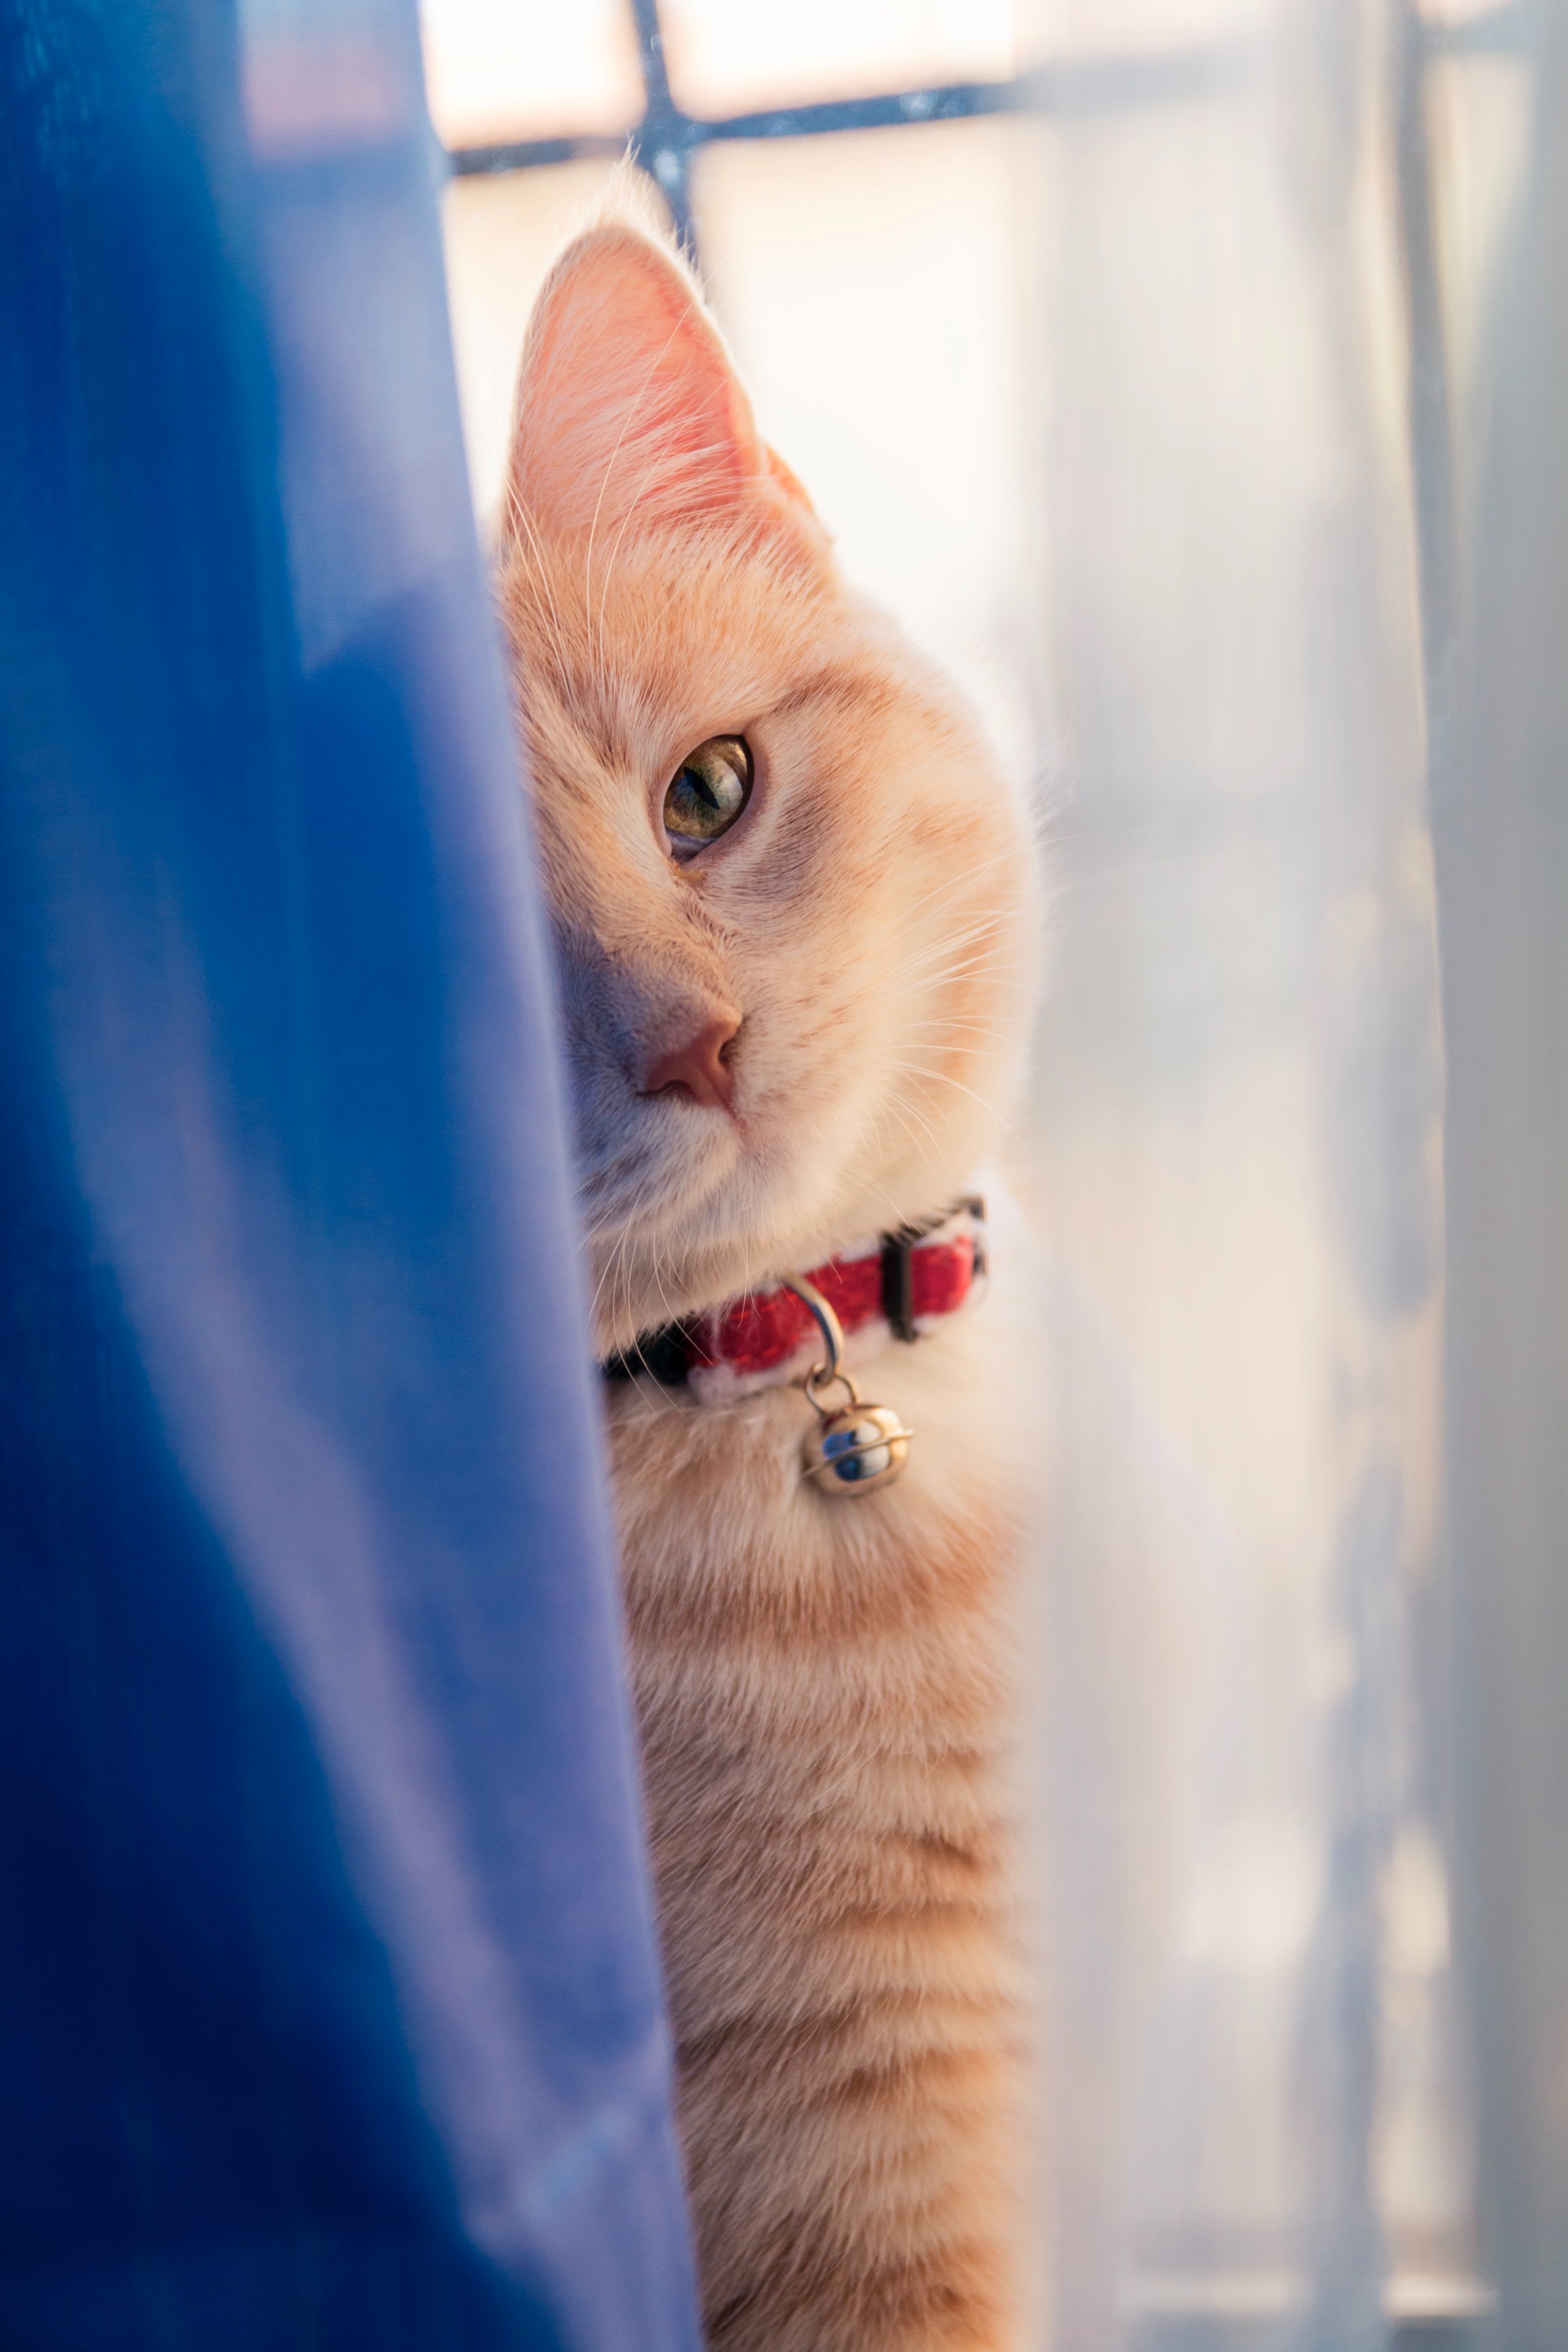 A cat sitting behind a curtain | Source: Pexels